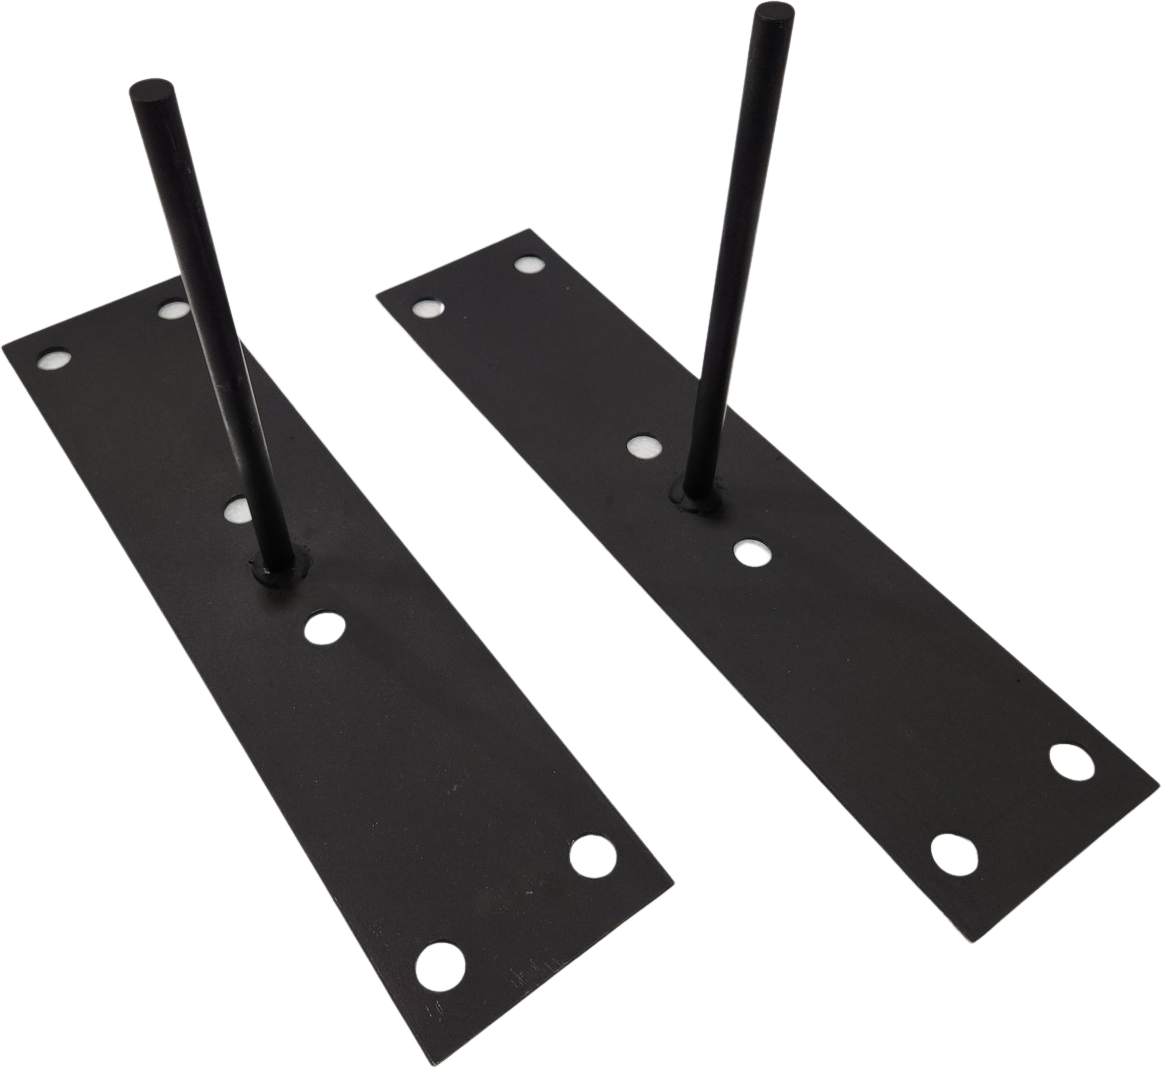 ZOMBIEBOX, Zombiebox Z-Wall Anchor Plates for Z-Wall Barriers New